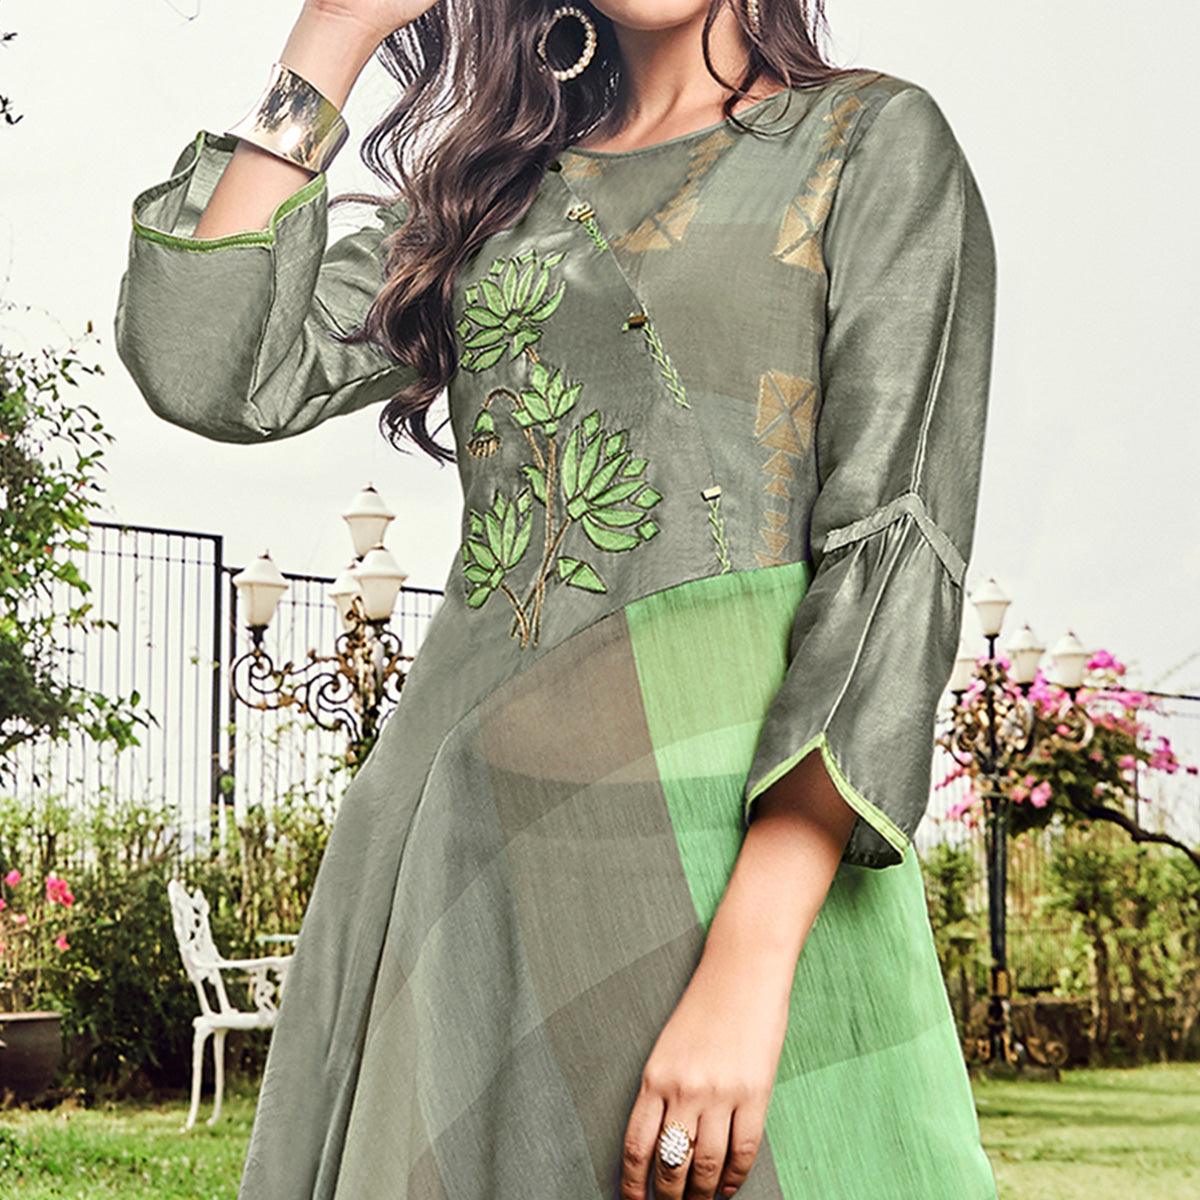 Brown Digital Print Party Wear Kurti | Indian Cloth Store - New Arrivals